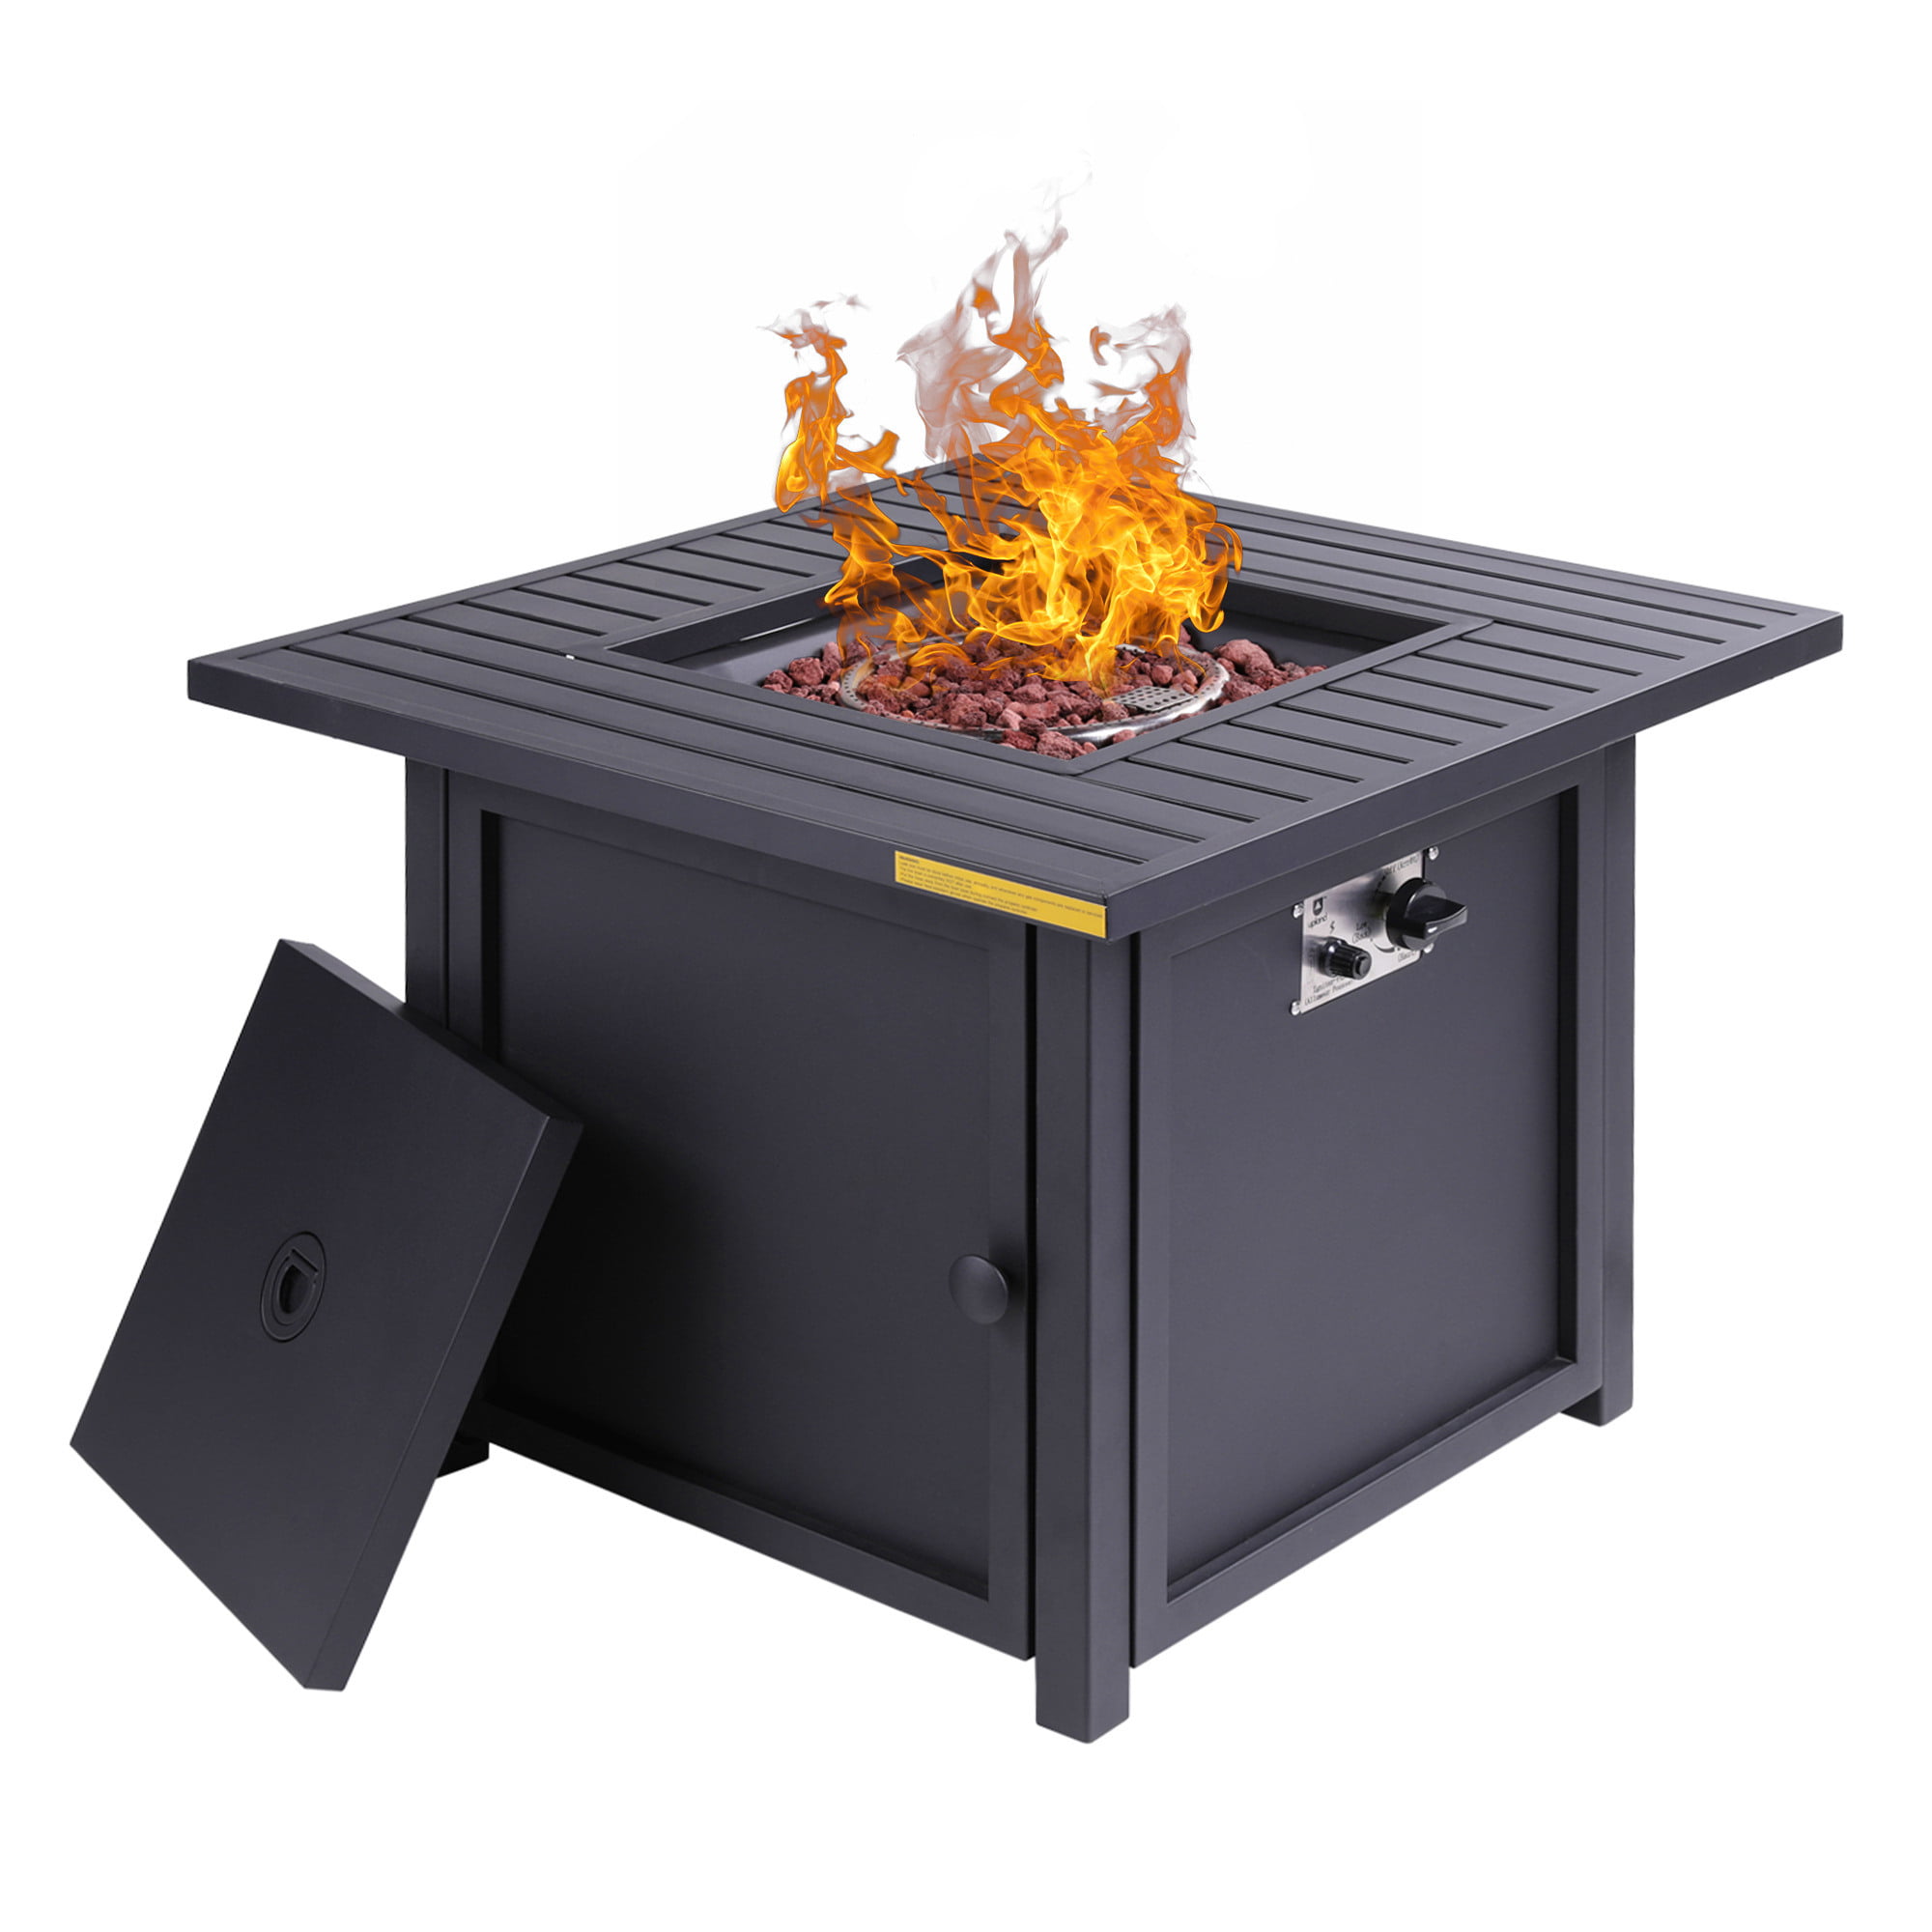 50,000 BTU Square 28inch Outdoor Gas Fire Pit TableGas Firepits with ...